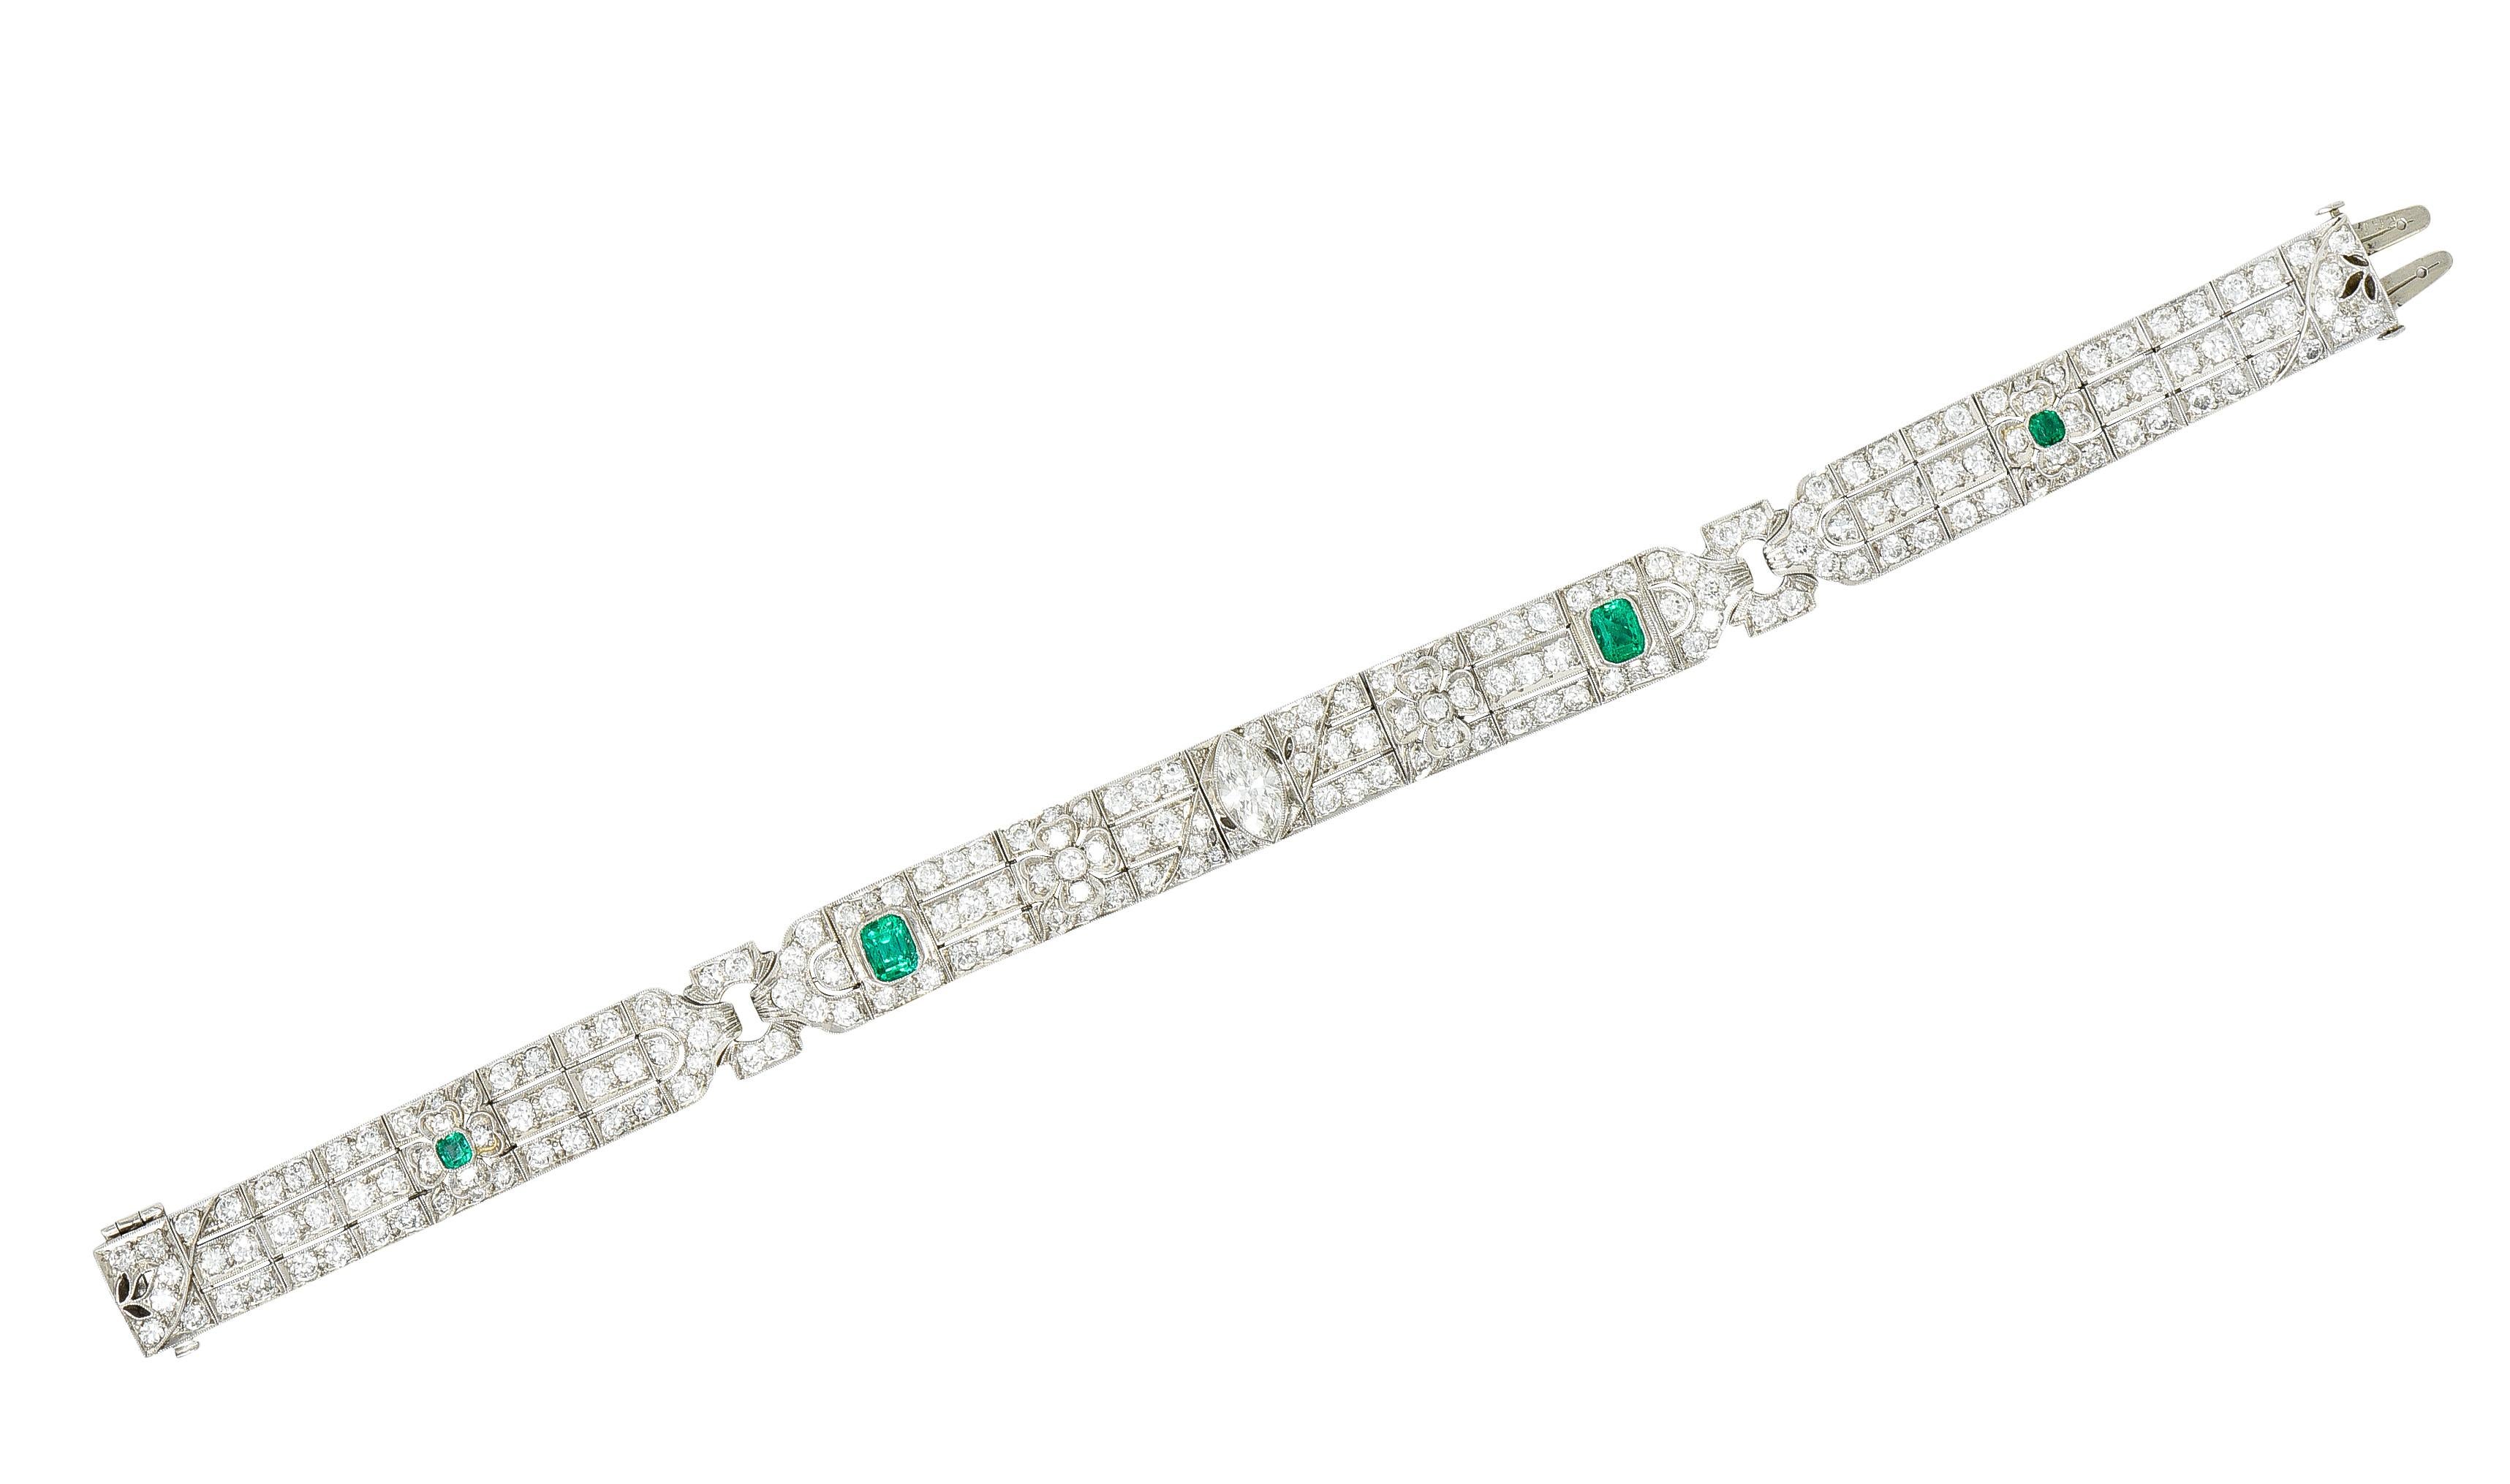 Bracelet is comprised of hinged links with clover and ribbon motifs - centering a marquise cut diamond. Bezel set and weighing approximately 0.85 carat total - I color with VS1 clarity. Accented by old European cut diamonds bead set throughout.